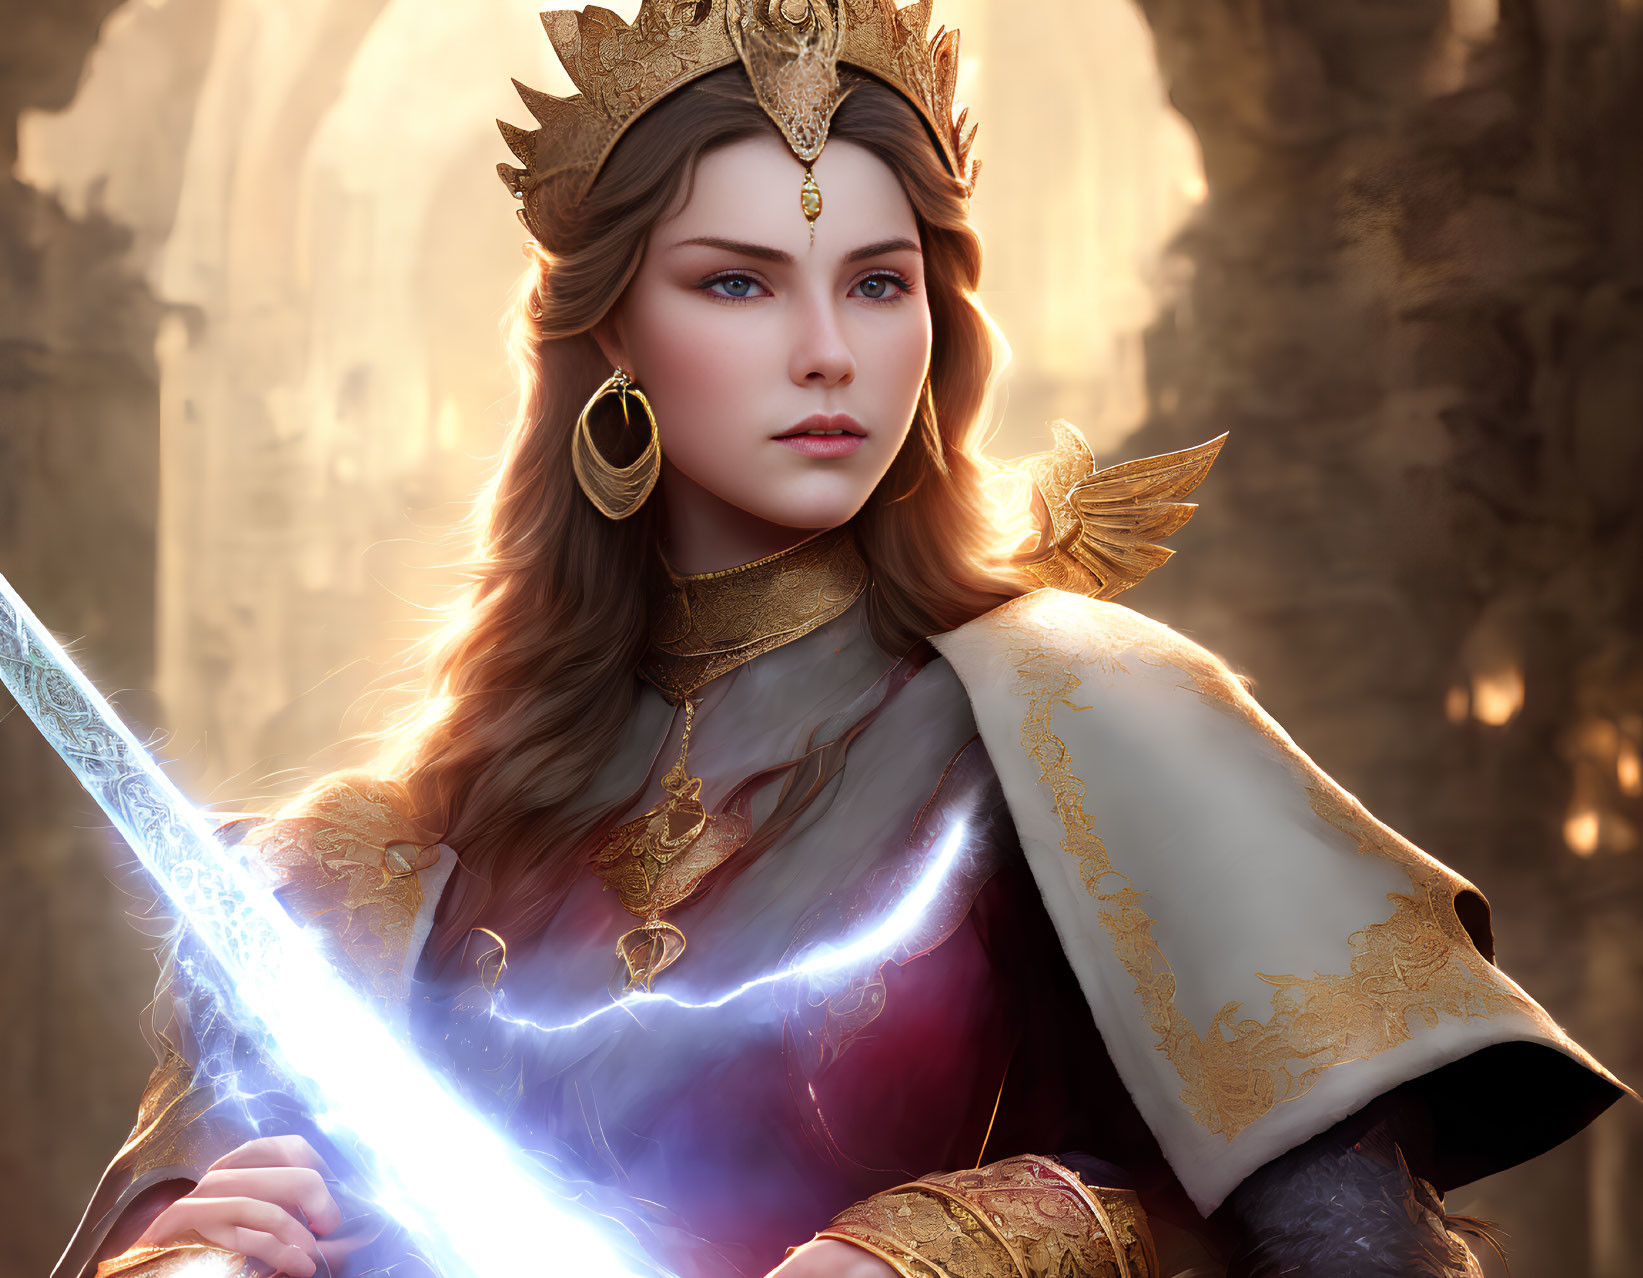 Regal woman in crown and armor with glowing sword on golden backdrop